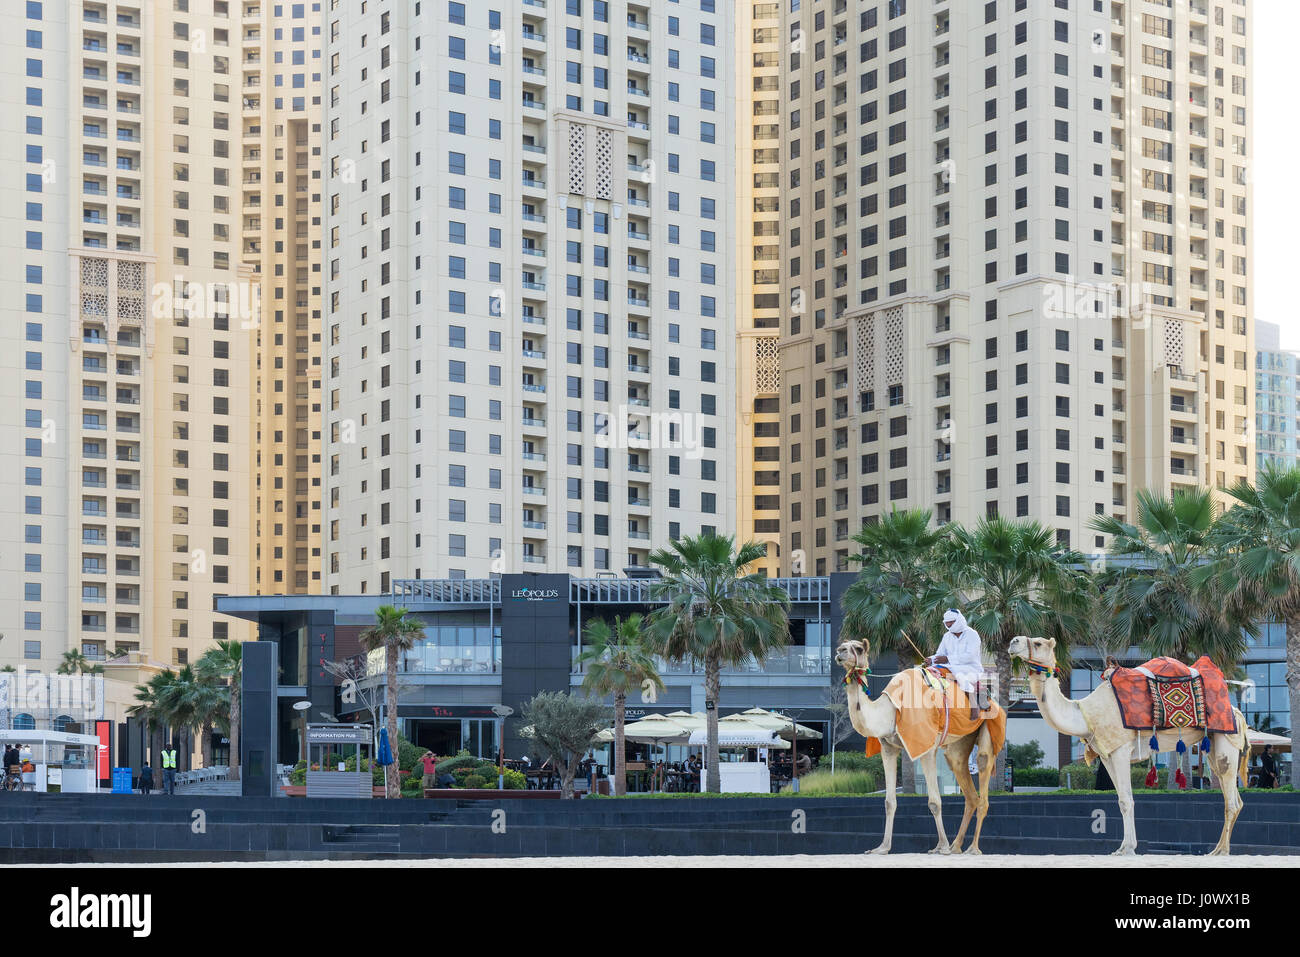 Dubai - January 25: Close up of bedouin, riding a camel in front of Dubai Marina residential skyscrapers and hotels on January 25, 2017. Stock Photo